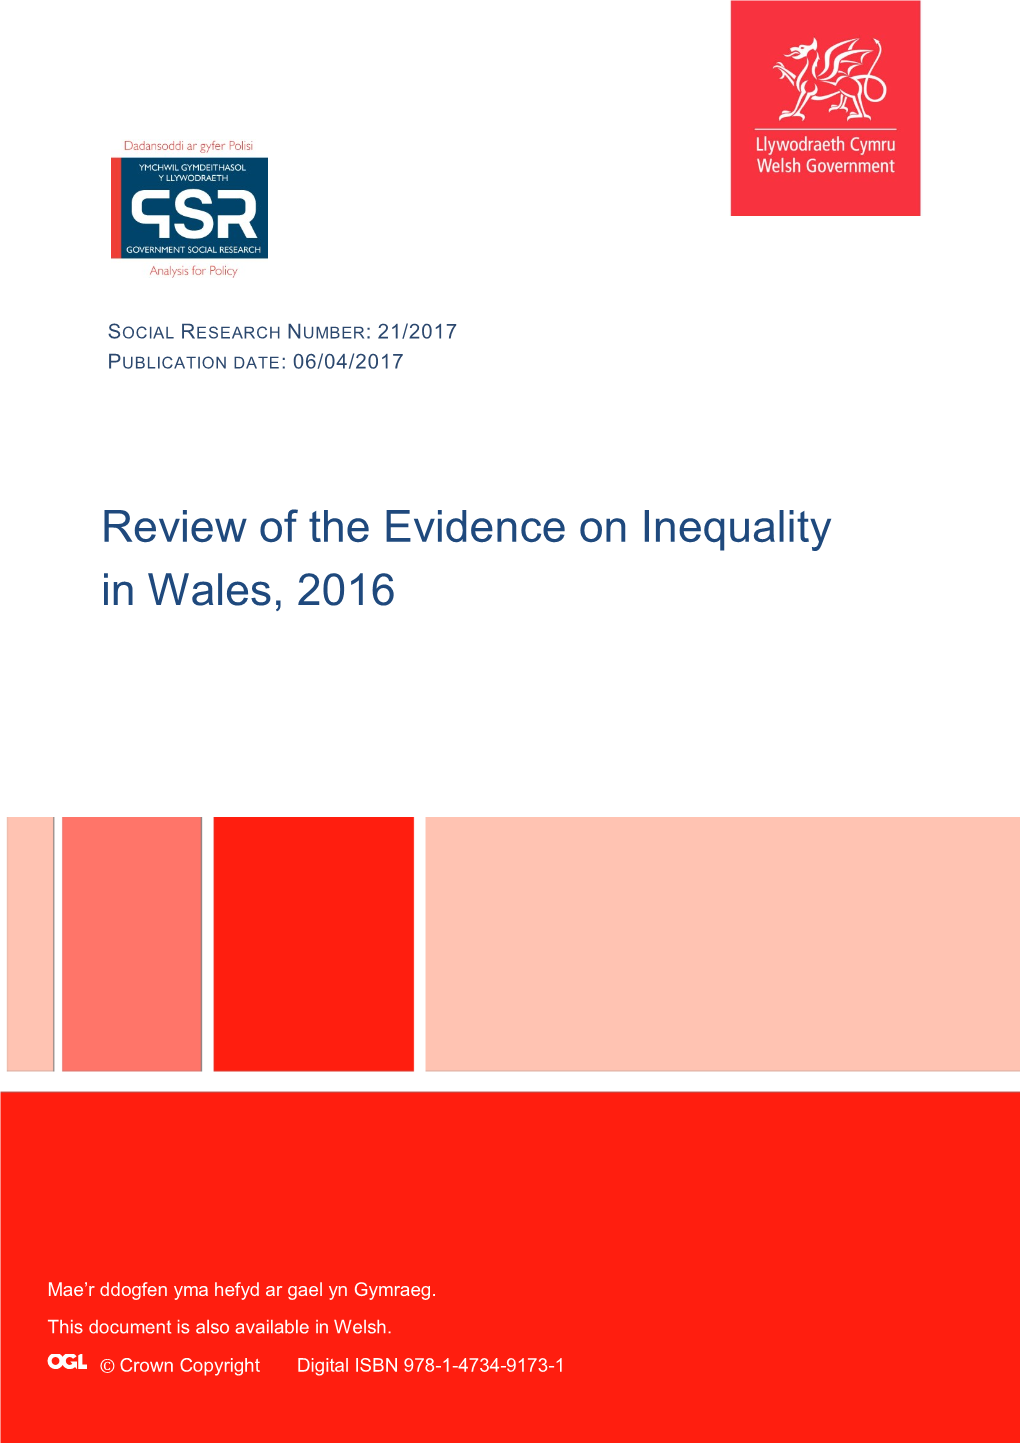 Review of the Evidence on Inequality in Wales, 2016